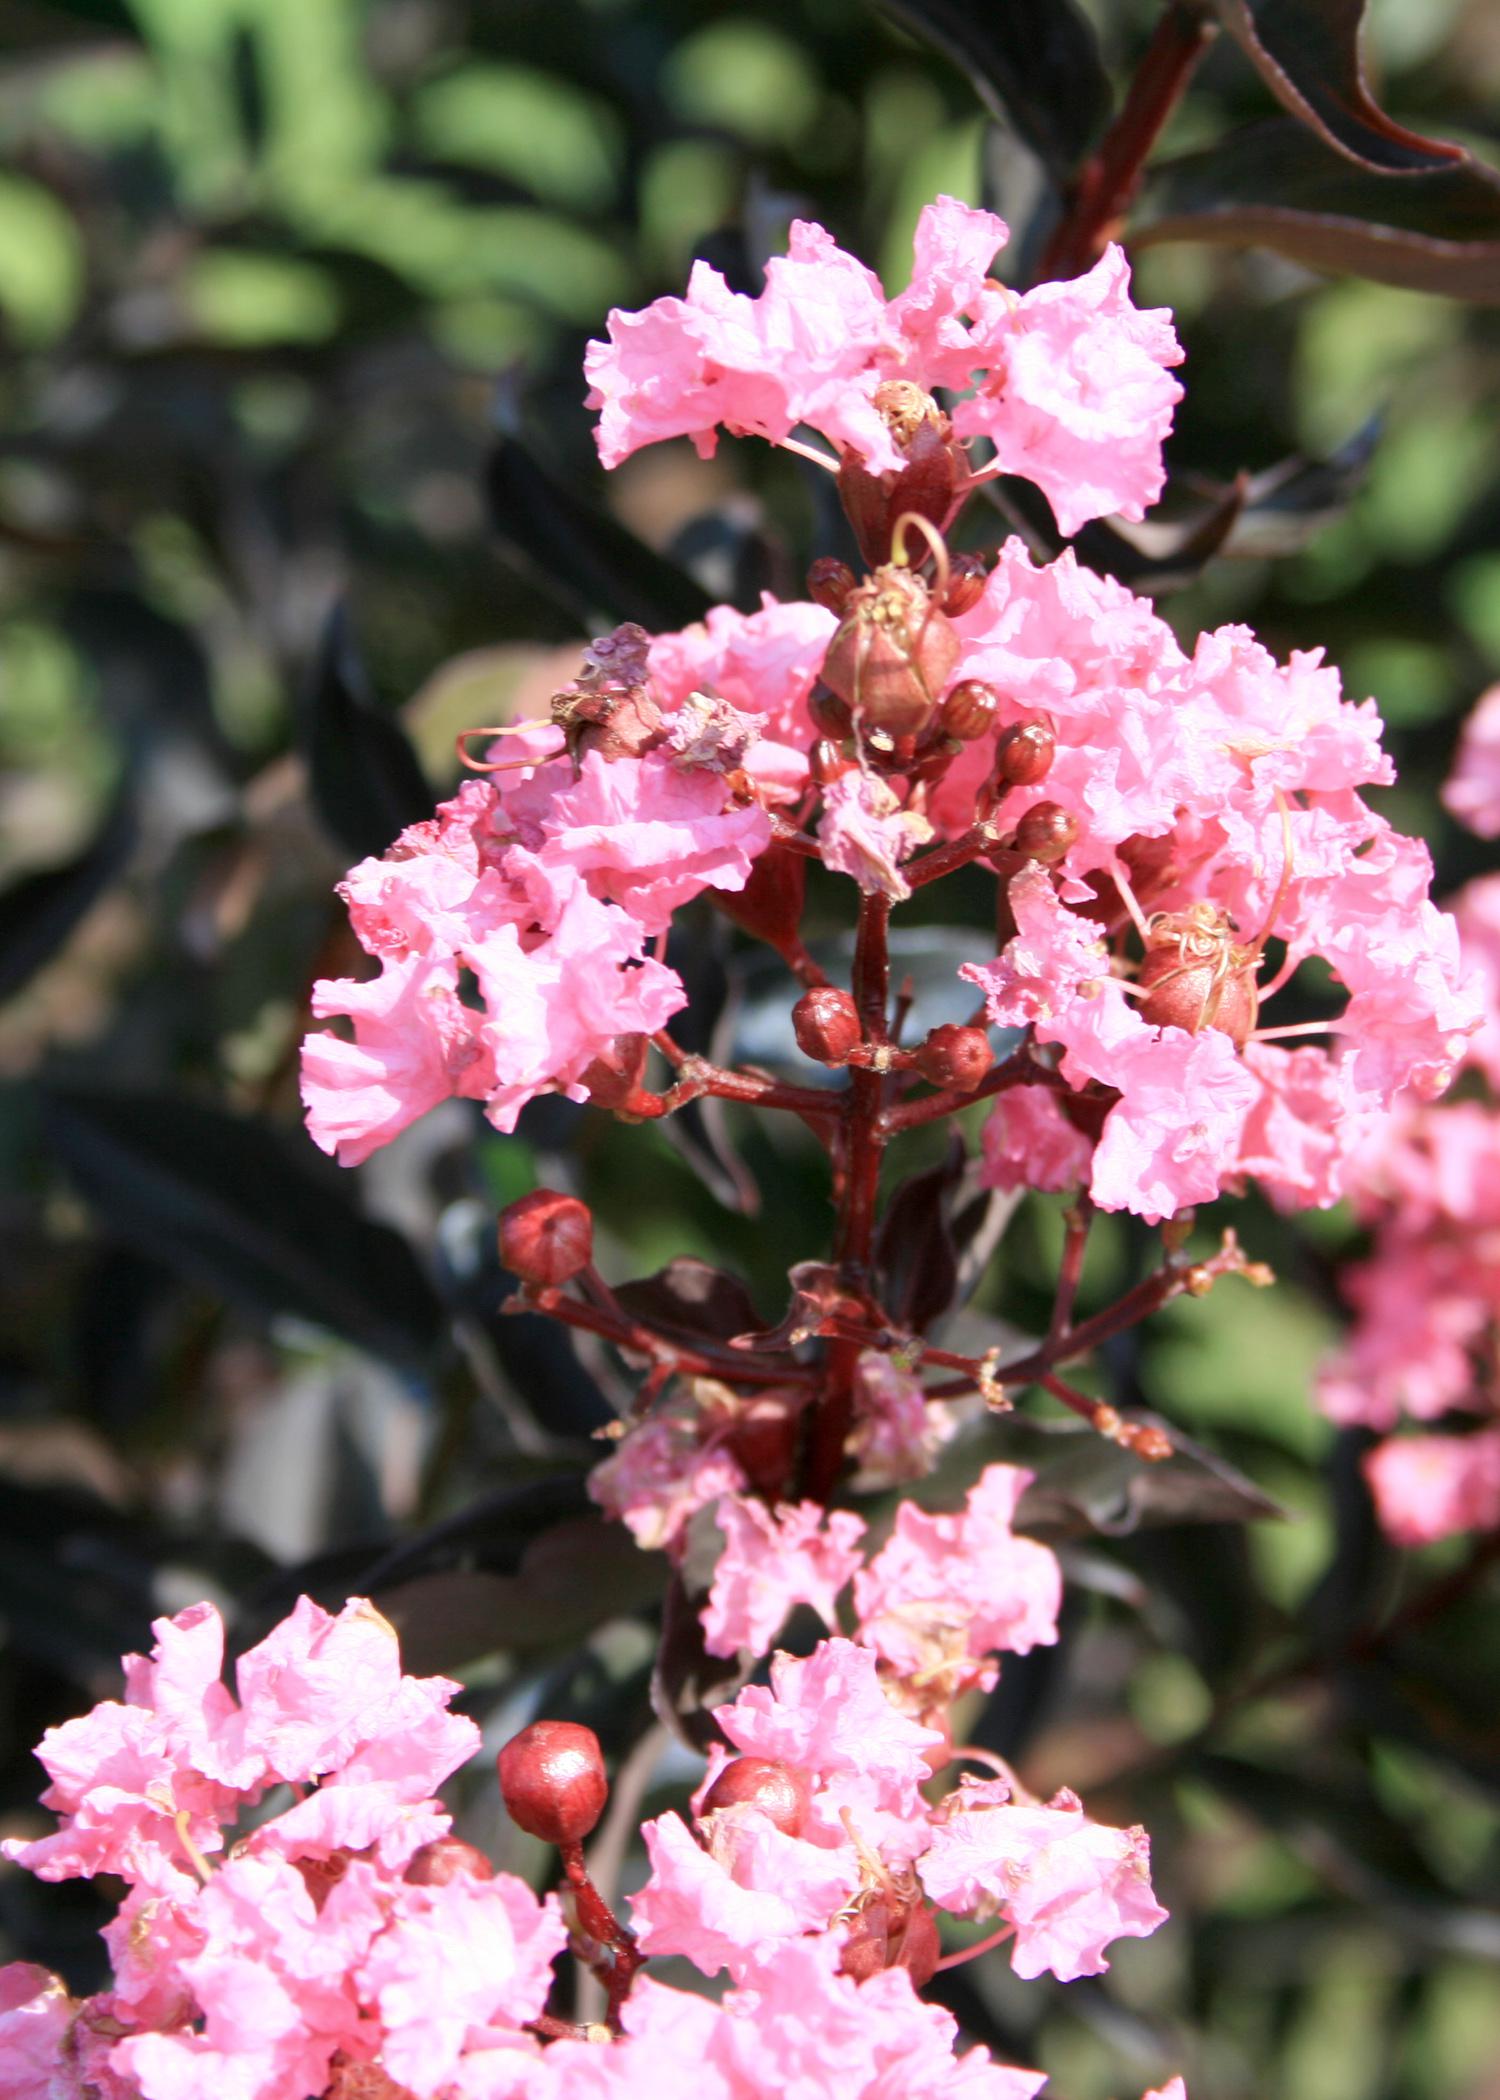 2015 Mississippi Medallion winner Delta Jazz crape myrtle, developed by Mississippi State University, has leaves that emerge a raspberry-maroon and then turn mahogany-brown, accenting large clusters of pink flowers in late summer. (Photo by MSU Extension Service/Gary Bachman)